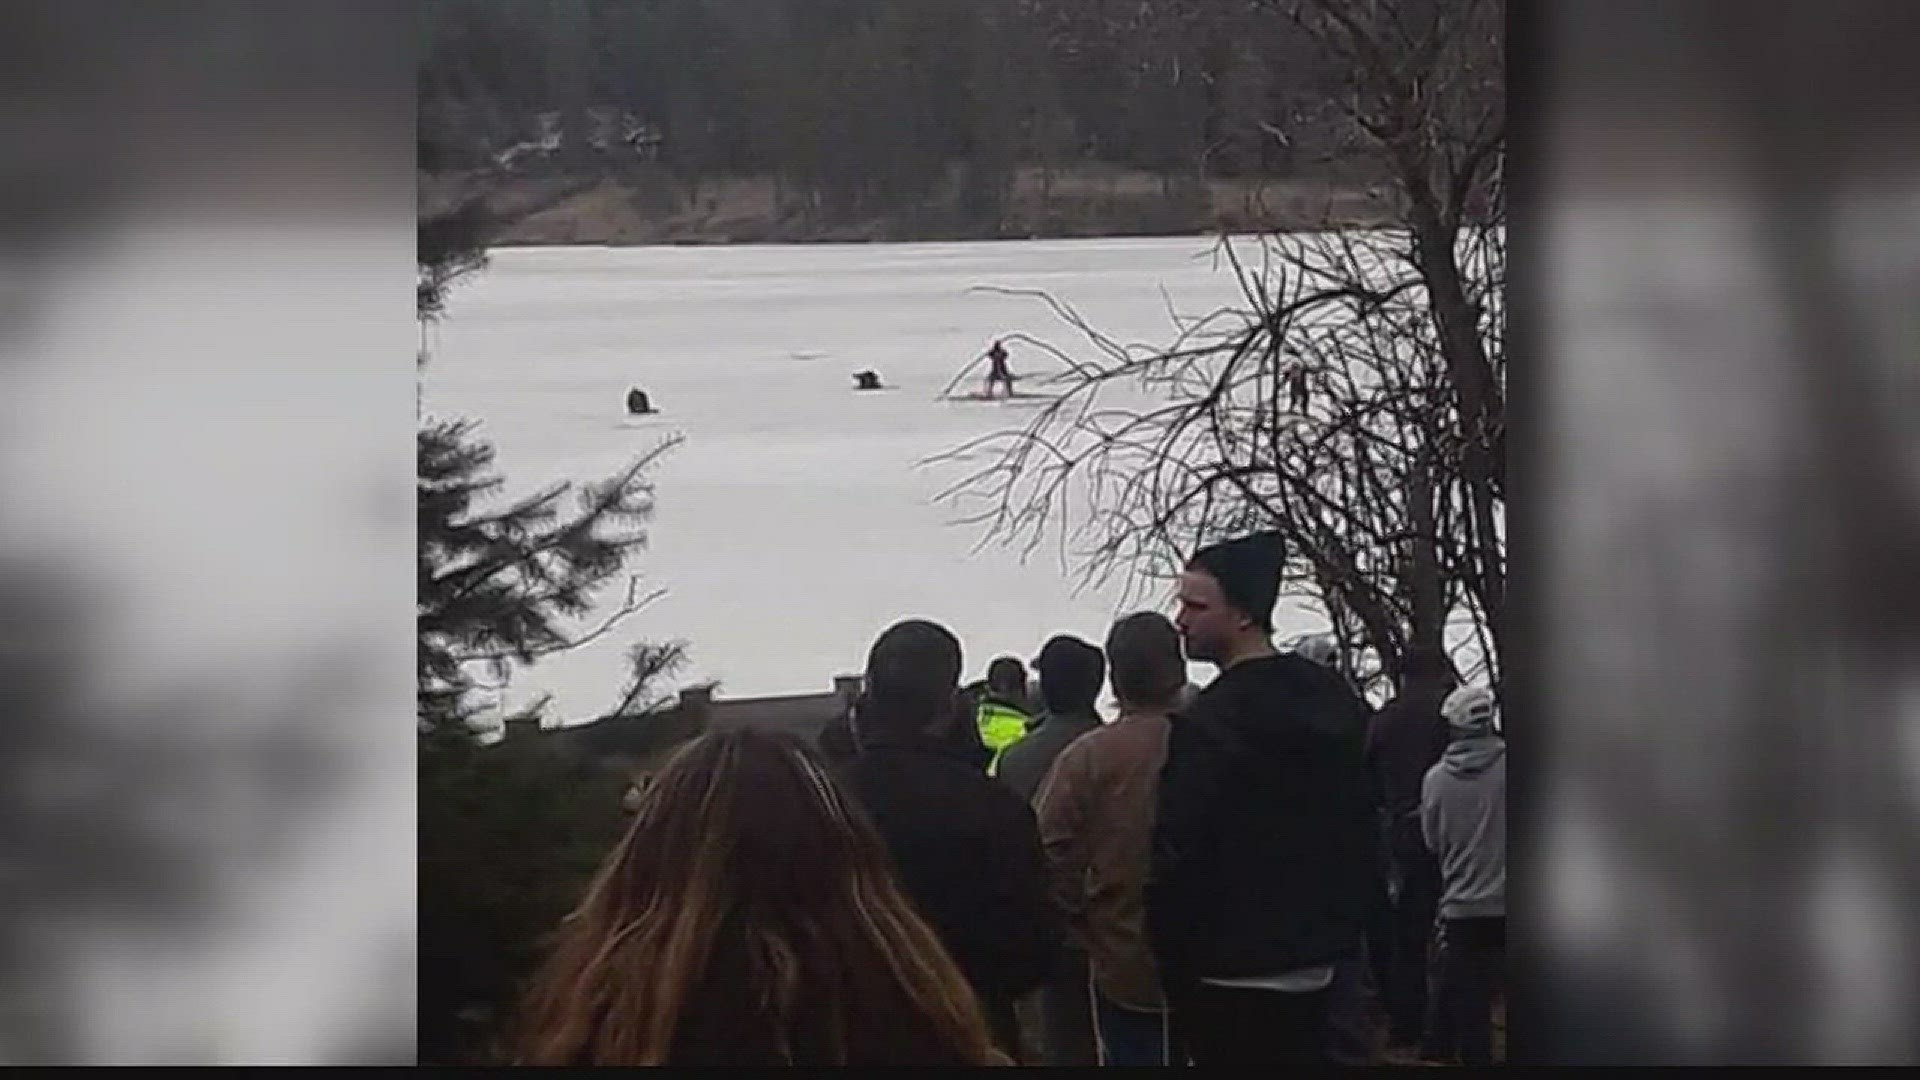 Two teens rescued after falling through ice at Avondale Lake (3-17-18)